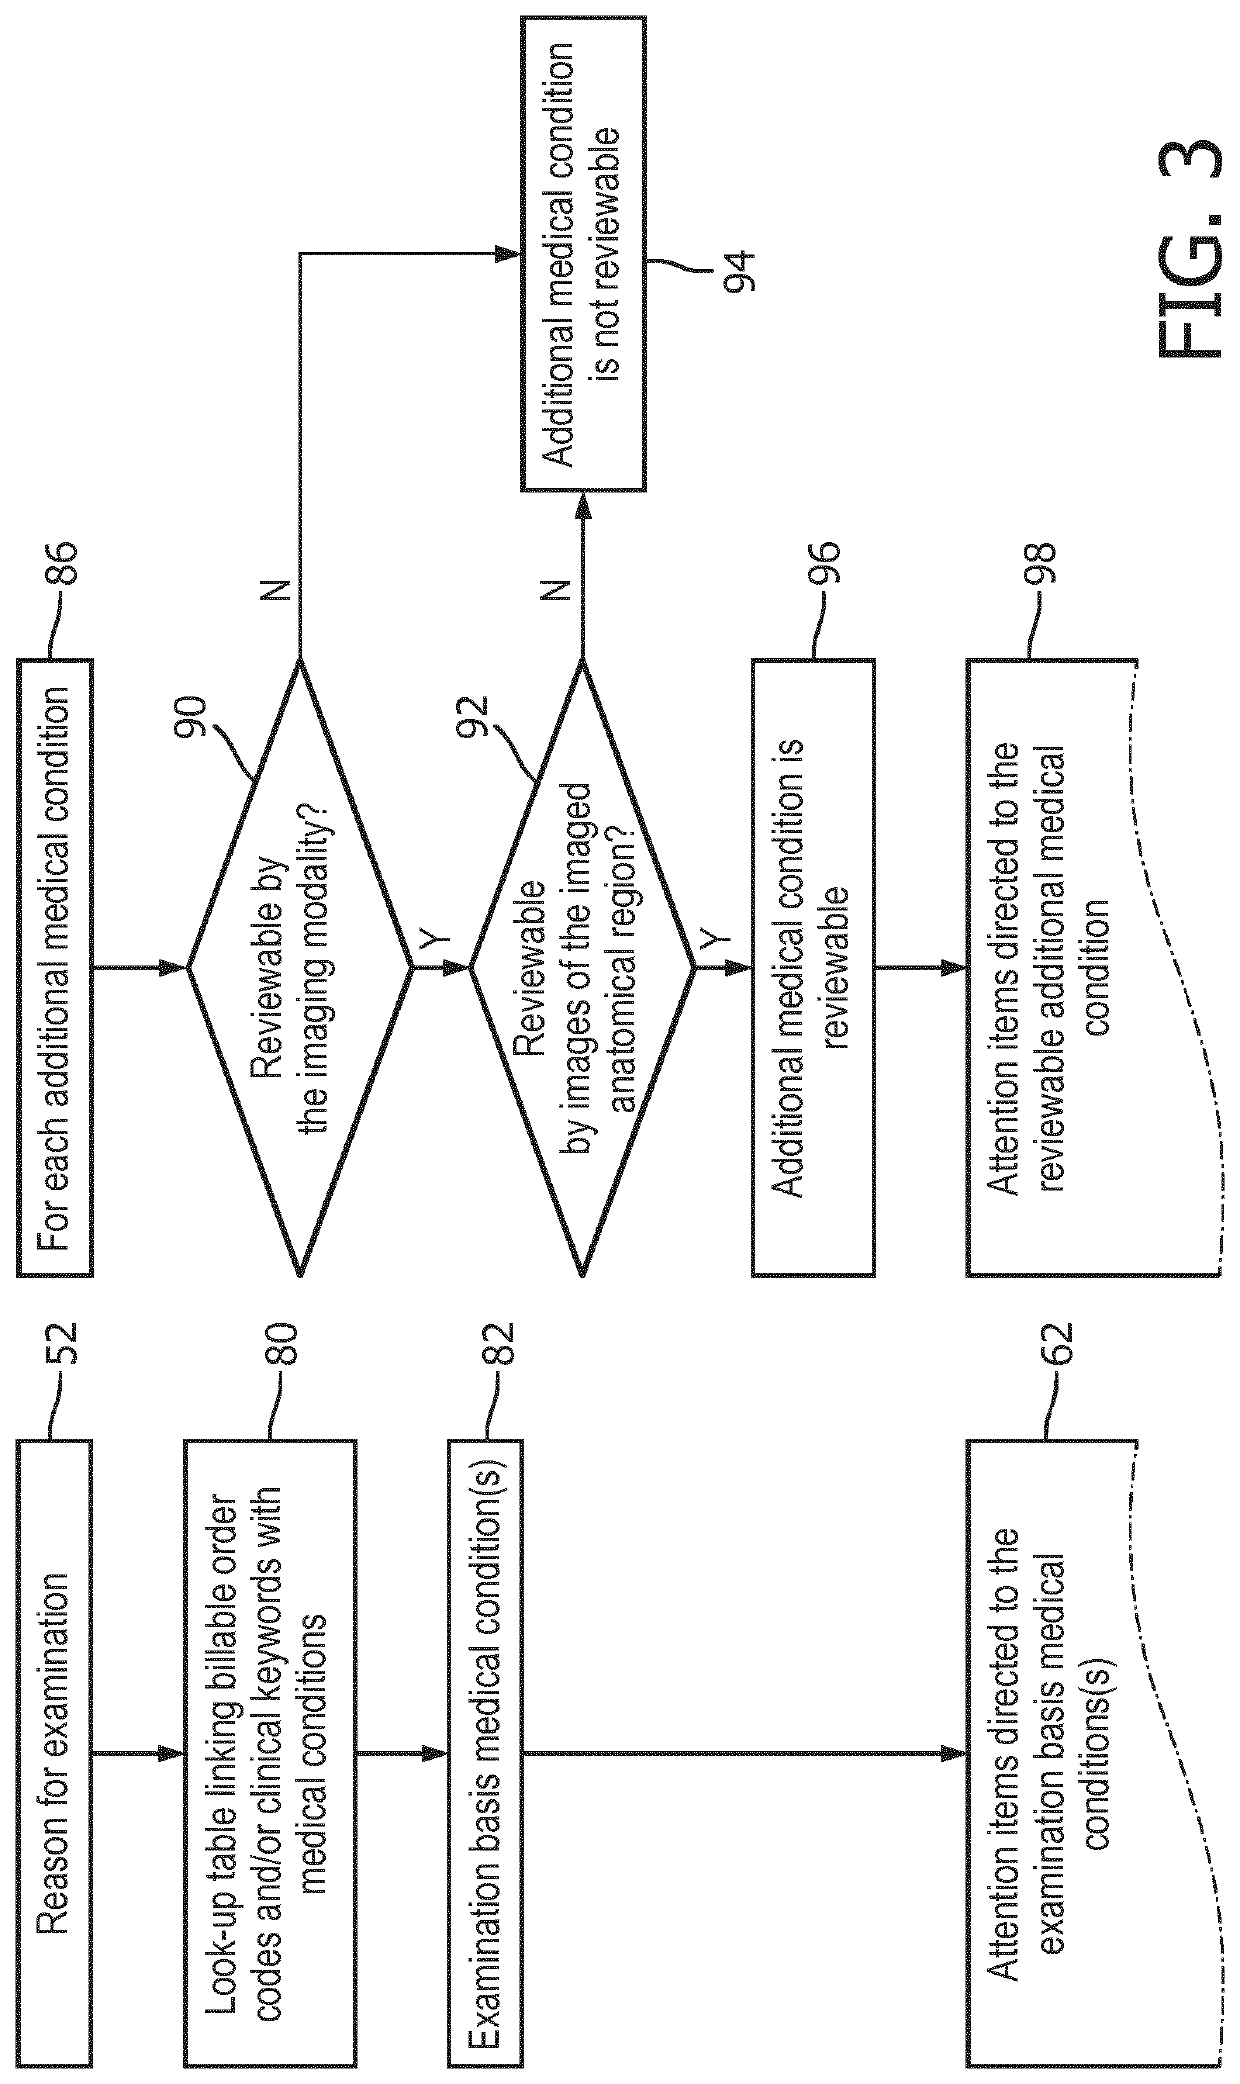 System and method to automatically prepare an attention list for improving radiology workflow